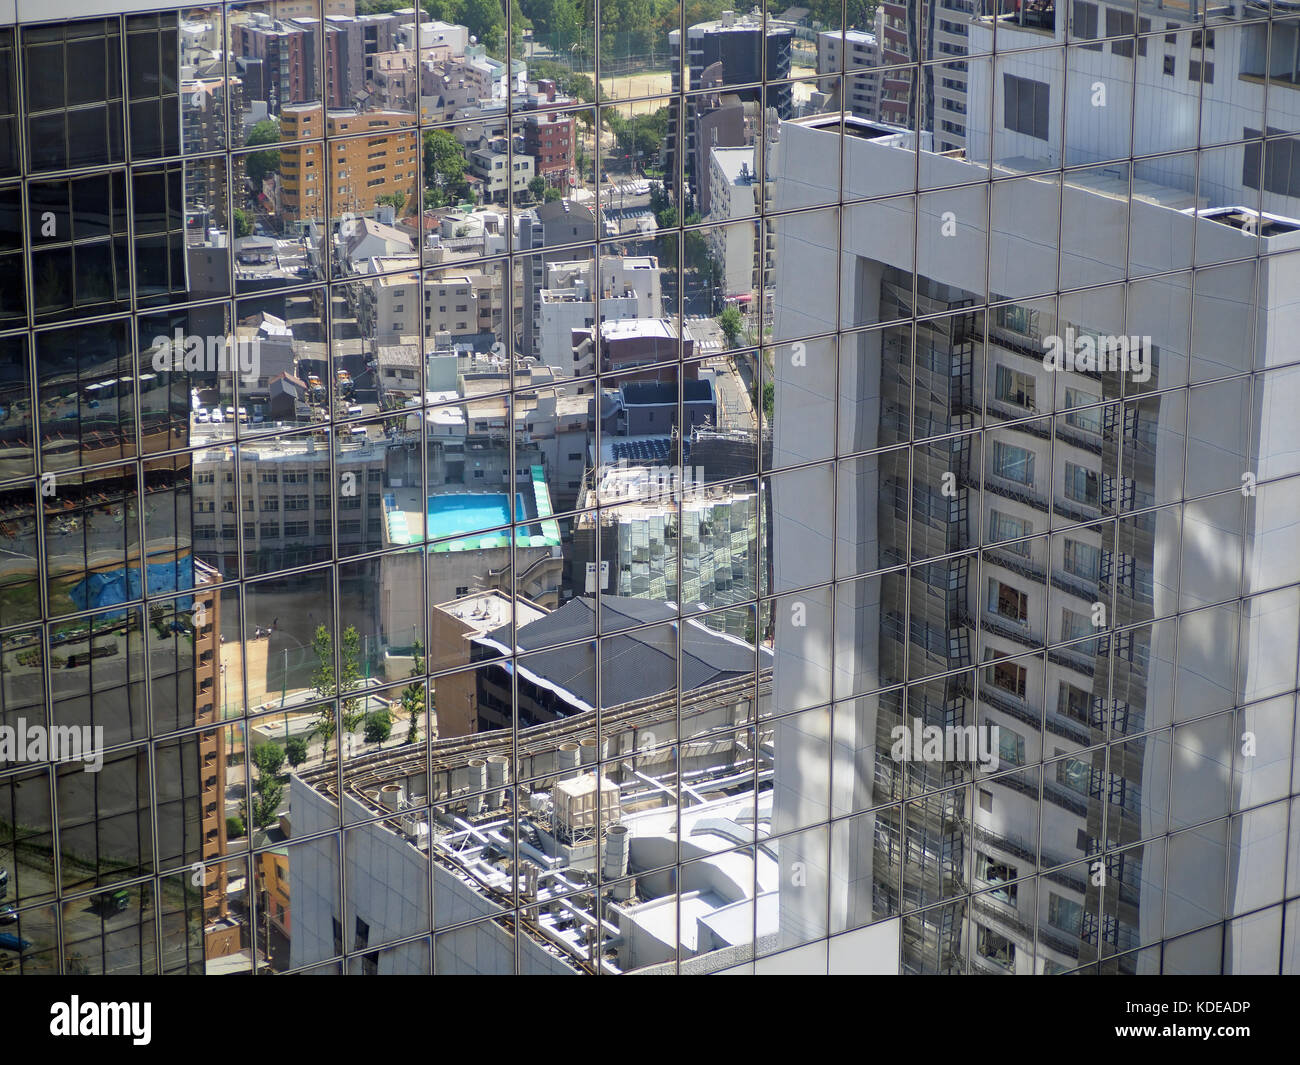 View of reflections in the glass windows of a tower of buildings in Osaka Japan Stock Photo